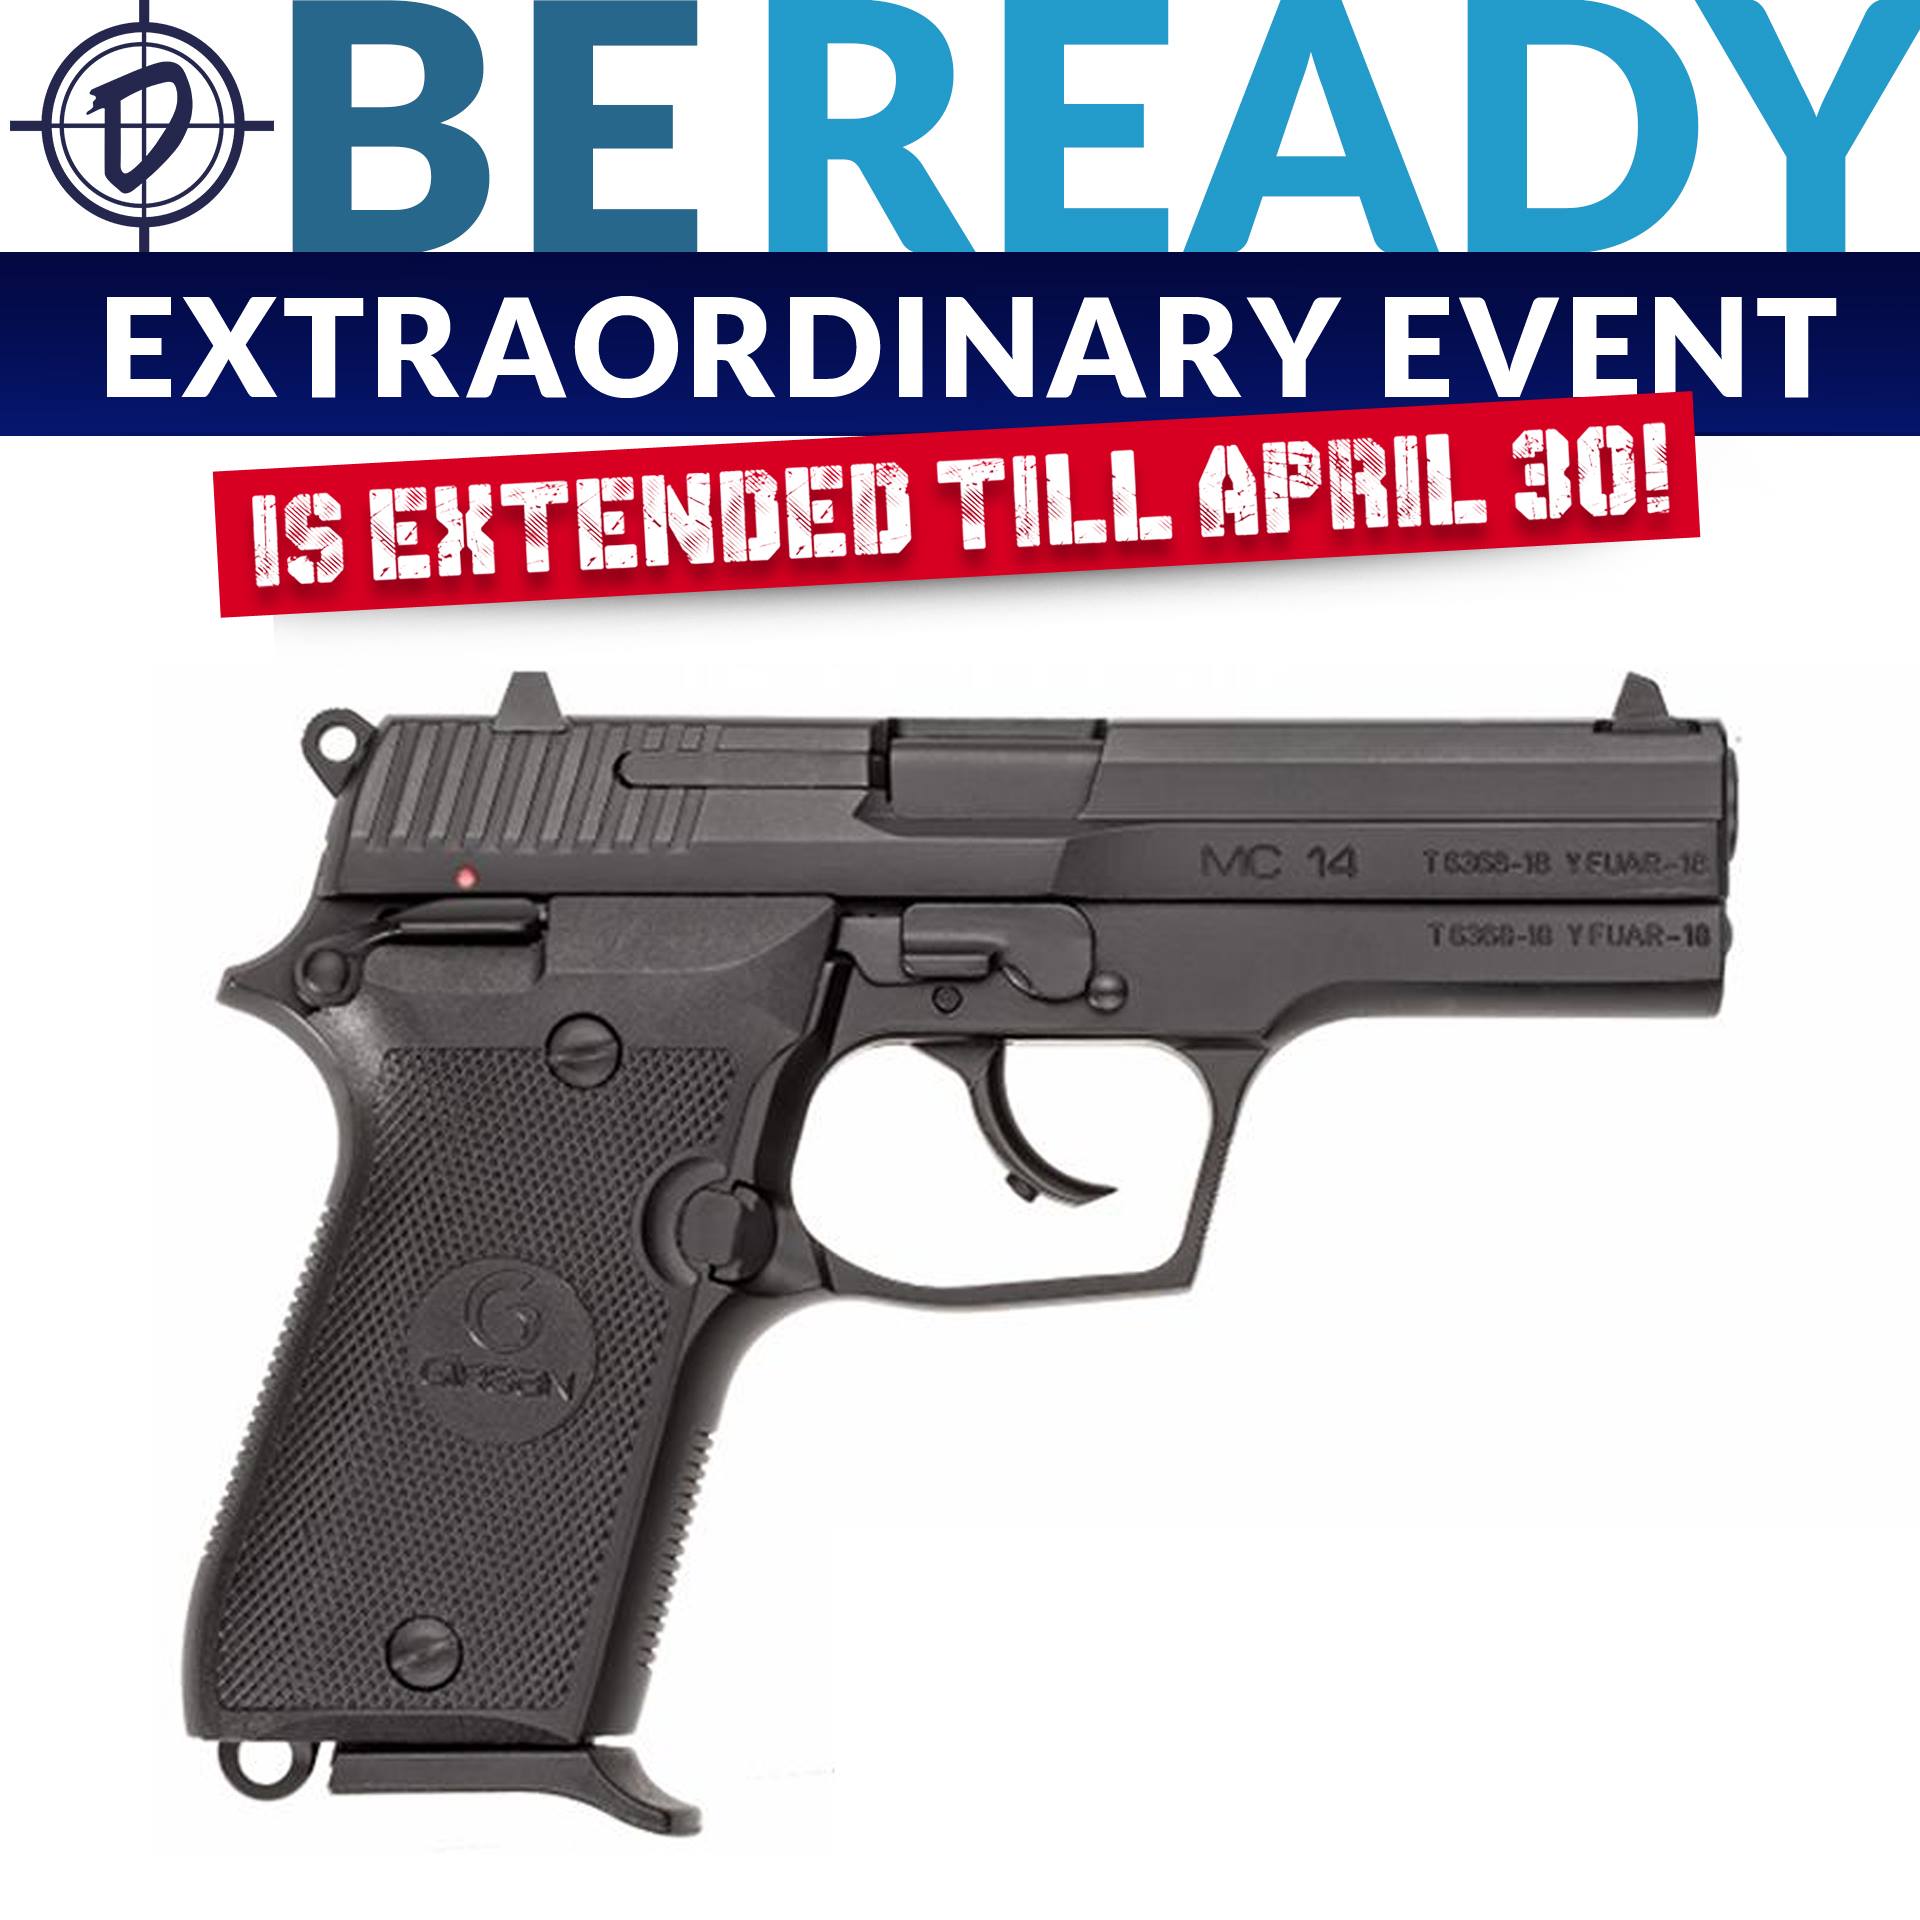 Be Ready for the Extended Extraordinary Sale Event